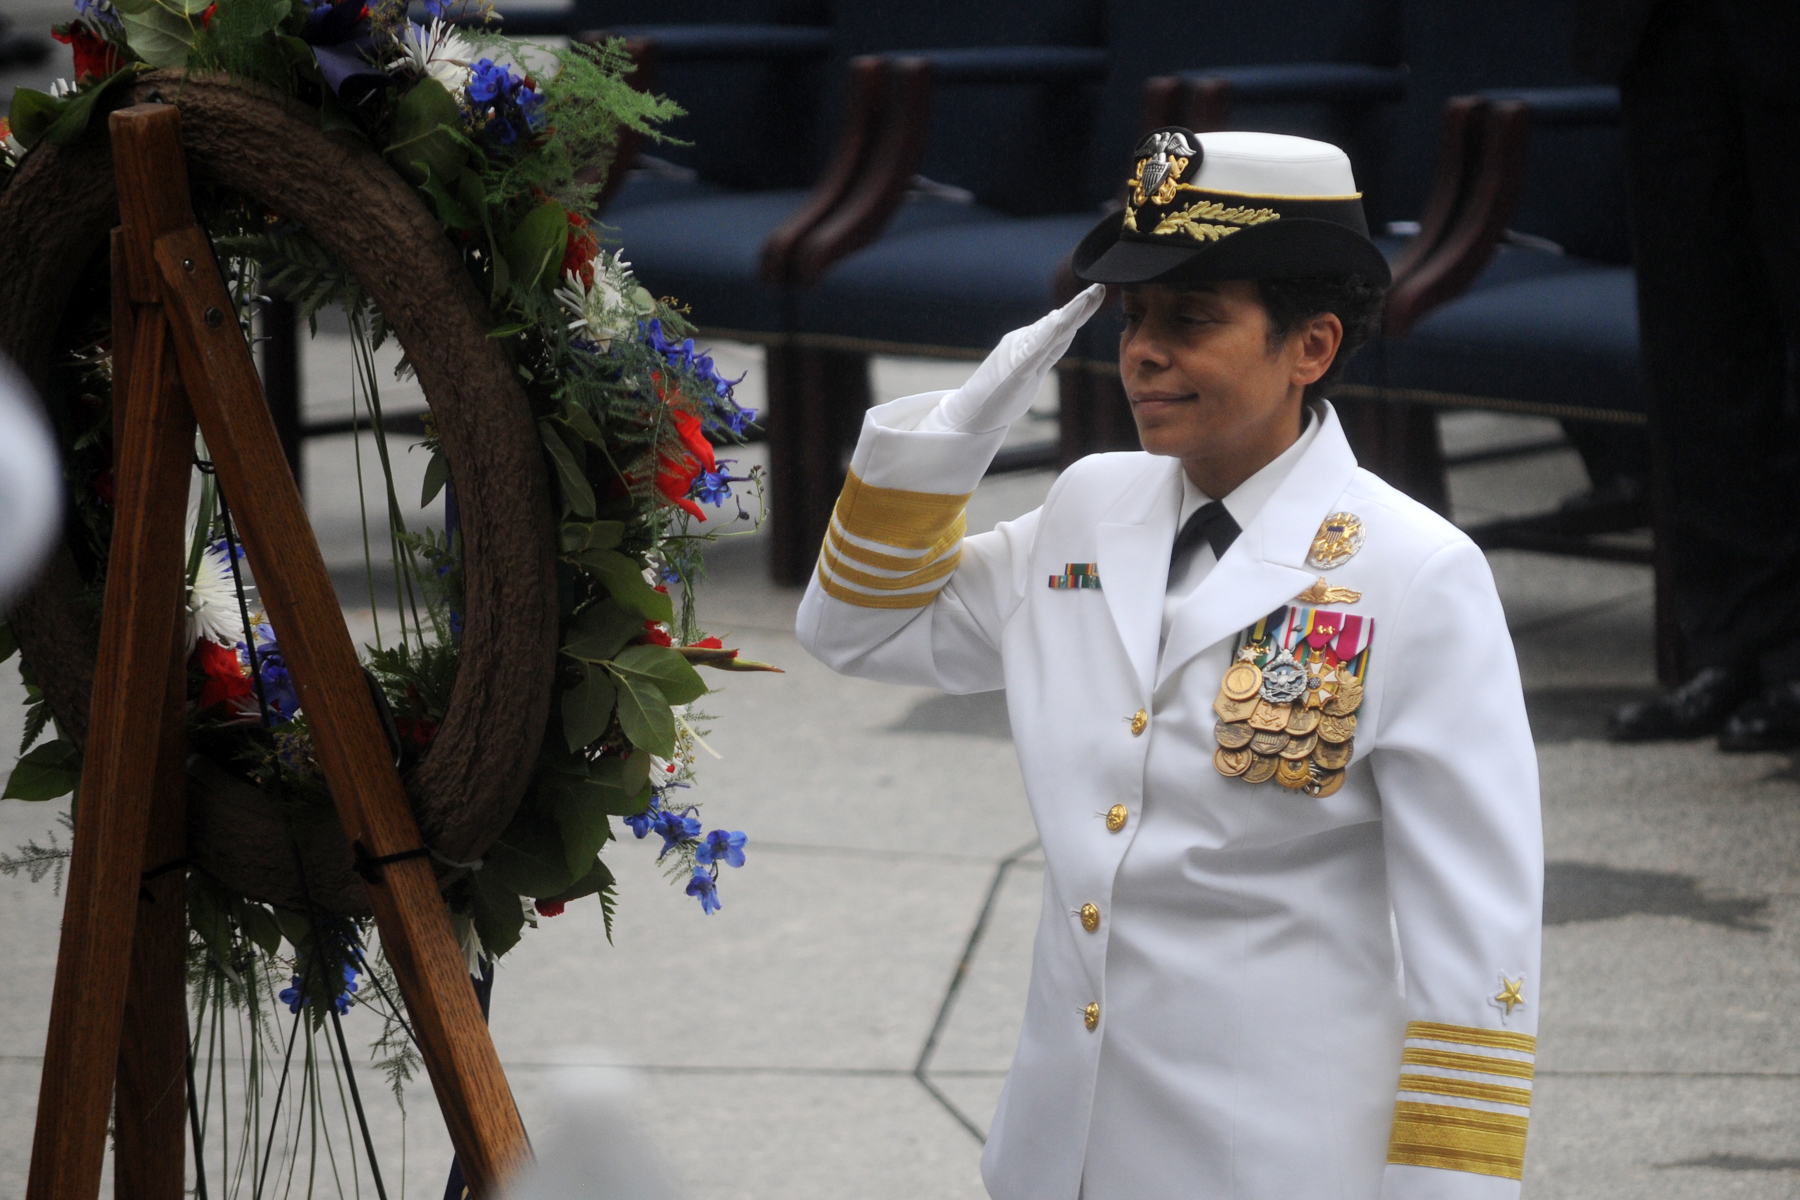 WASHINGTON (June 4, 2015) Vice Chief of Naval Operations (VCNO) Adm. Michelle Howard renders honors during a wreath laying at the Navy Memorial to commemorate the 73rd anniversary of the Battle of Midway. Photo courtesy of U.S. Navy.